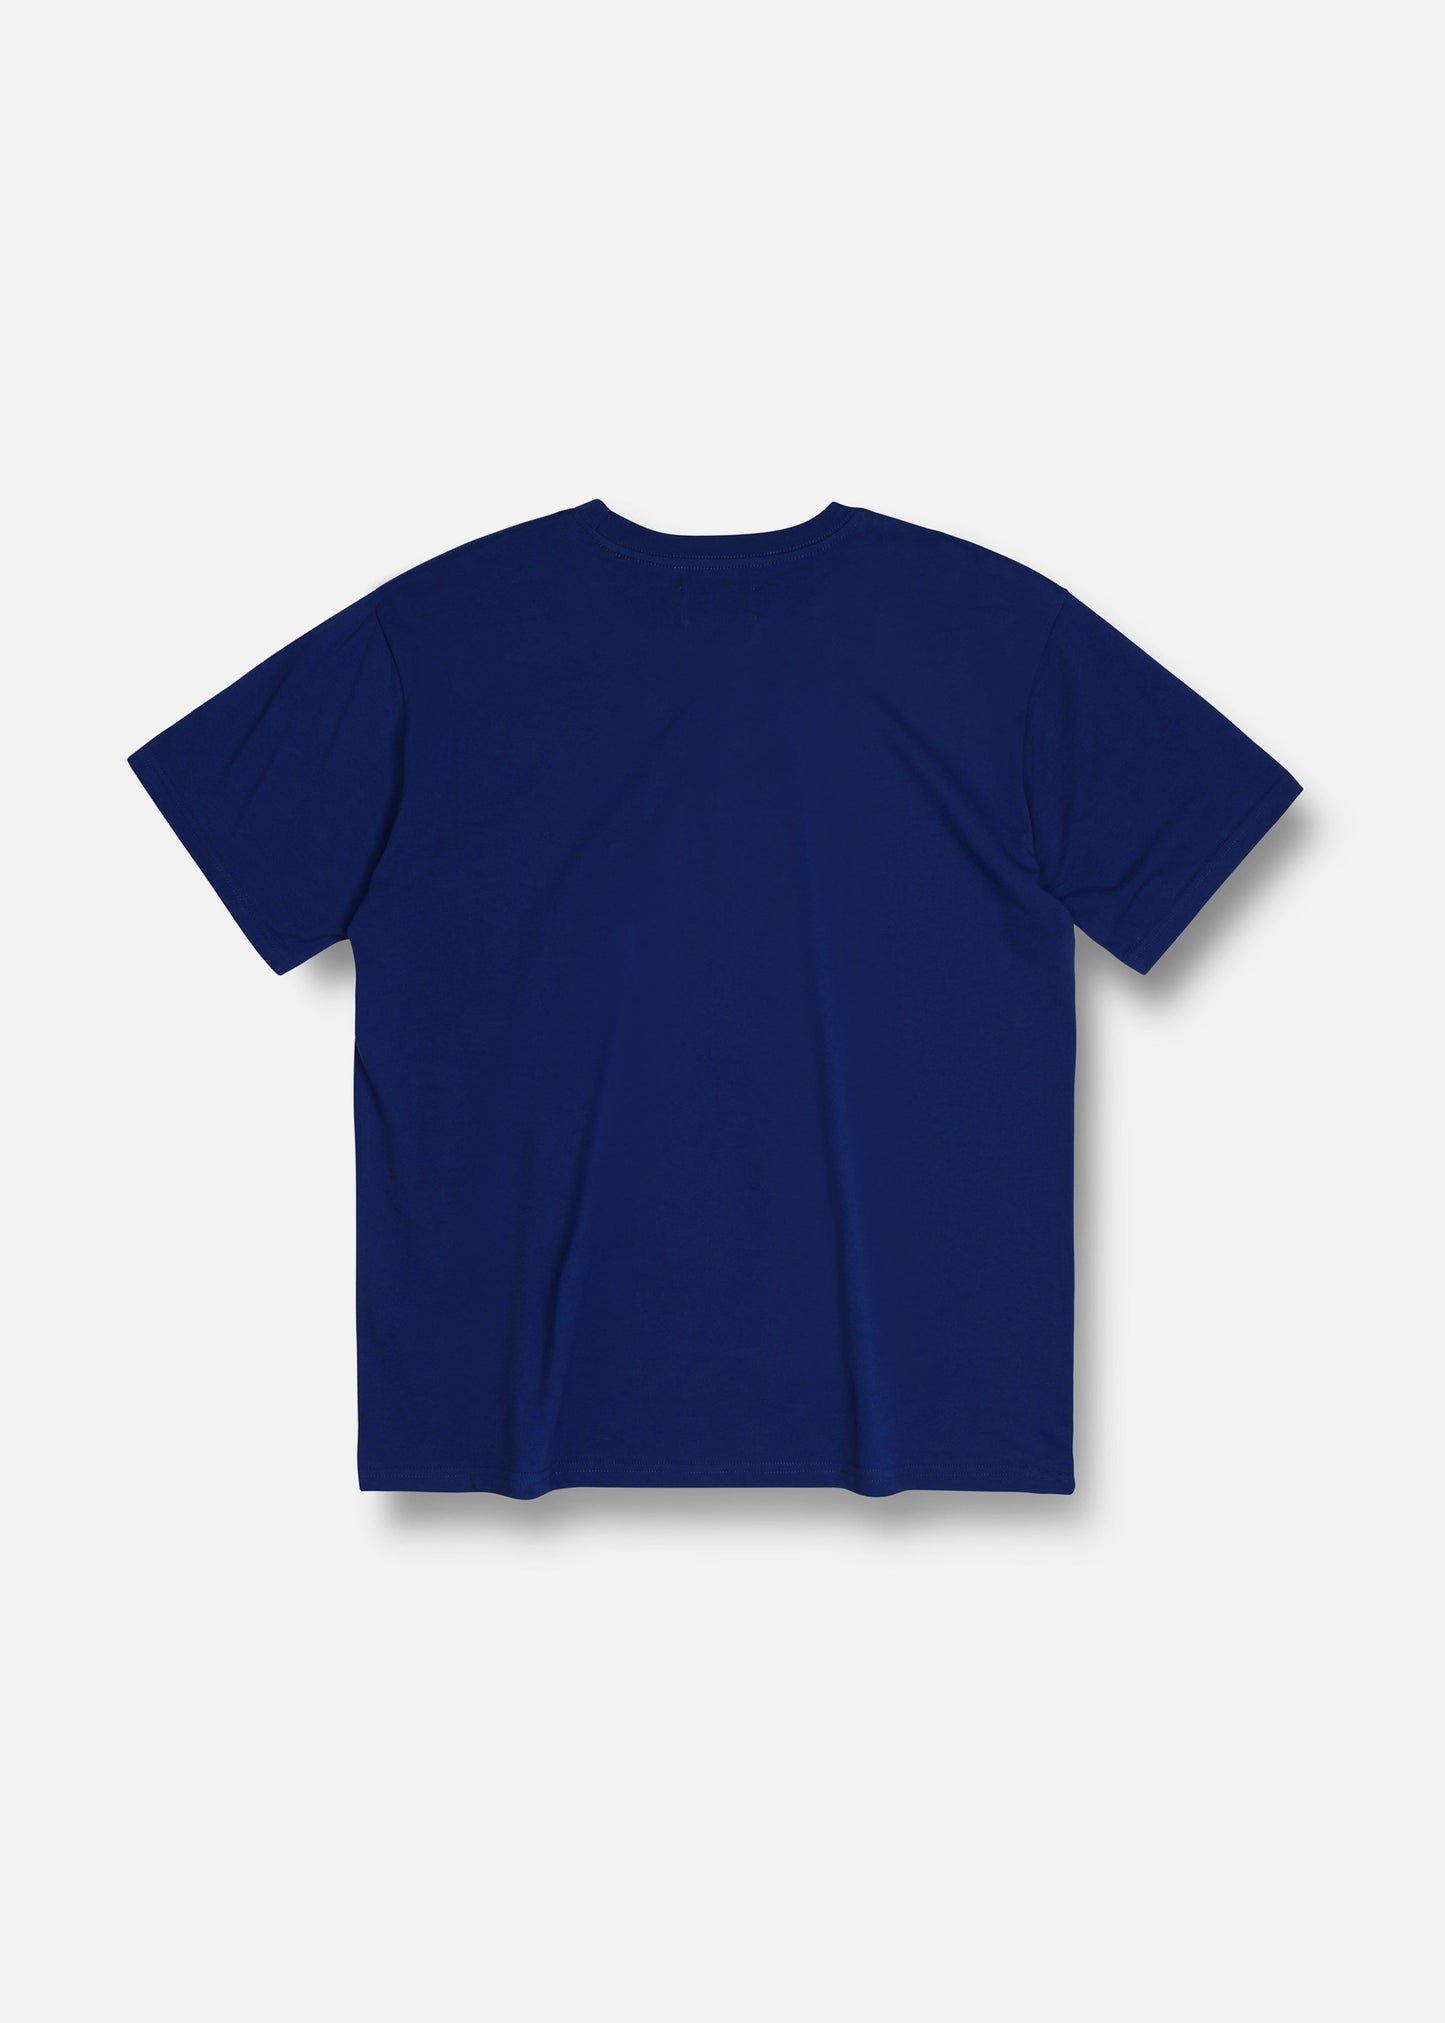 PROJECTS T-SHIRT : SPORTS BLUE